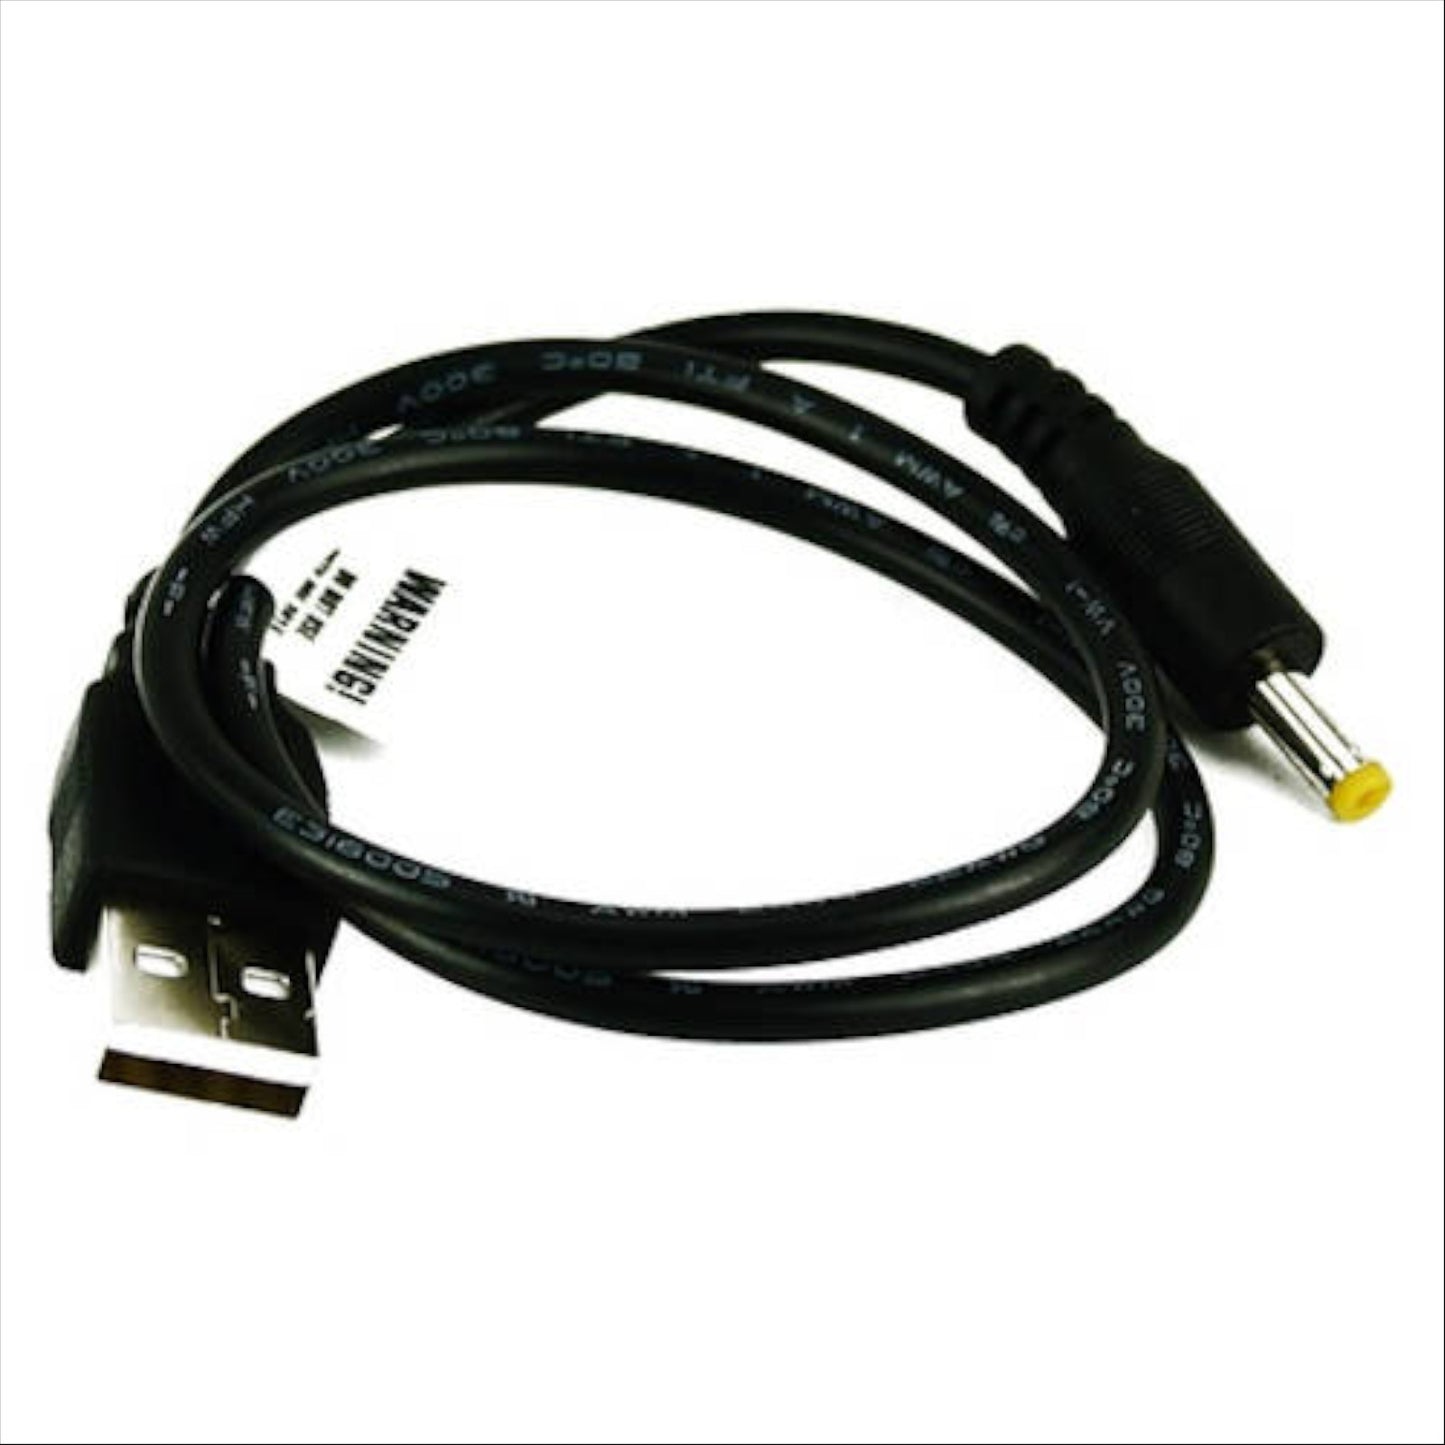 USE Exposure USB Bike Light Charger Cable